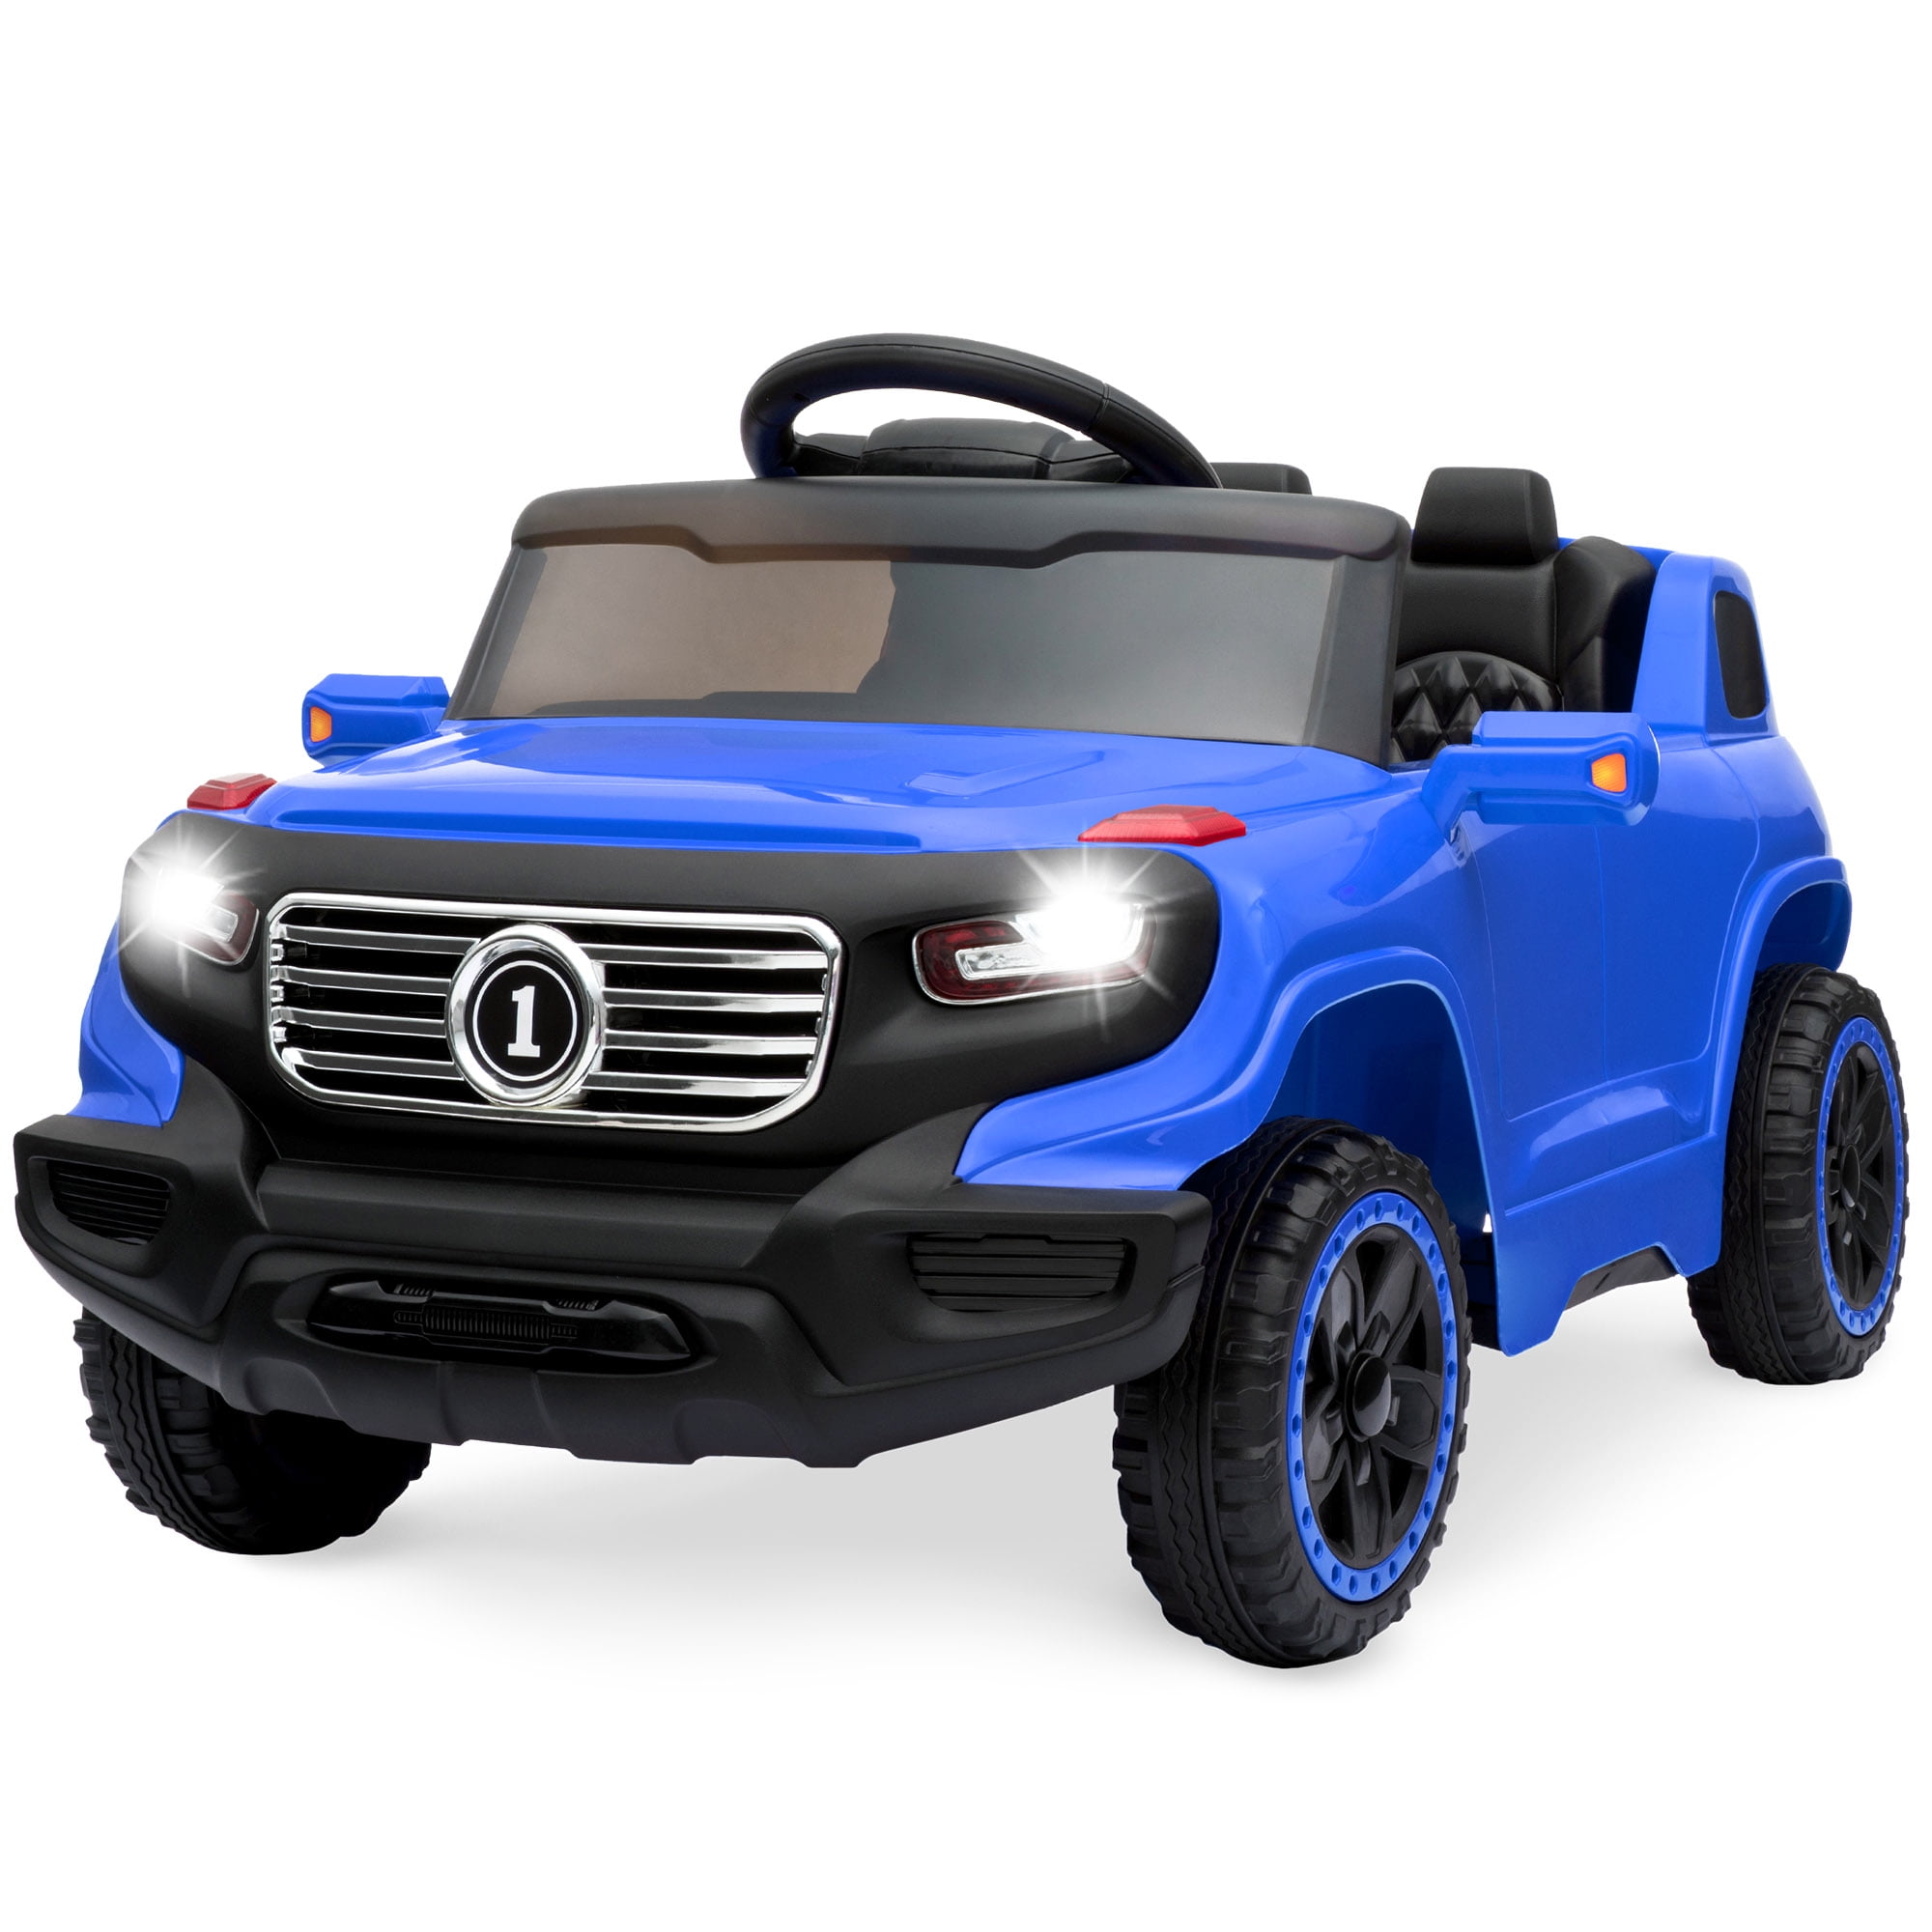 Details about   Kids Ride on Cars Remote Control 6v Electric Battery Truck Horn Toy Led Mp3 AUX 